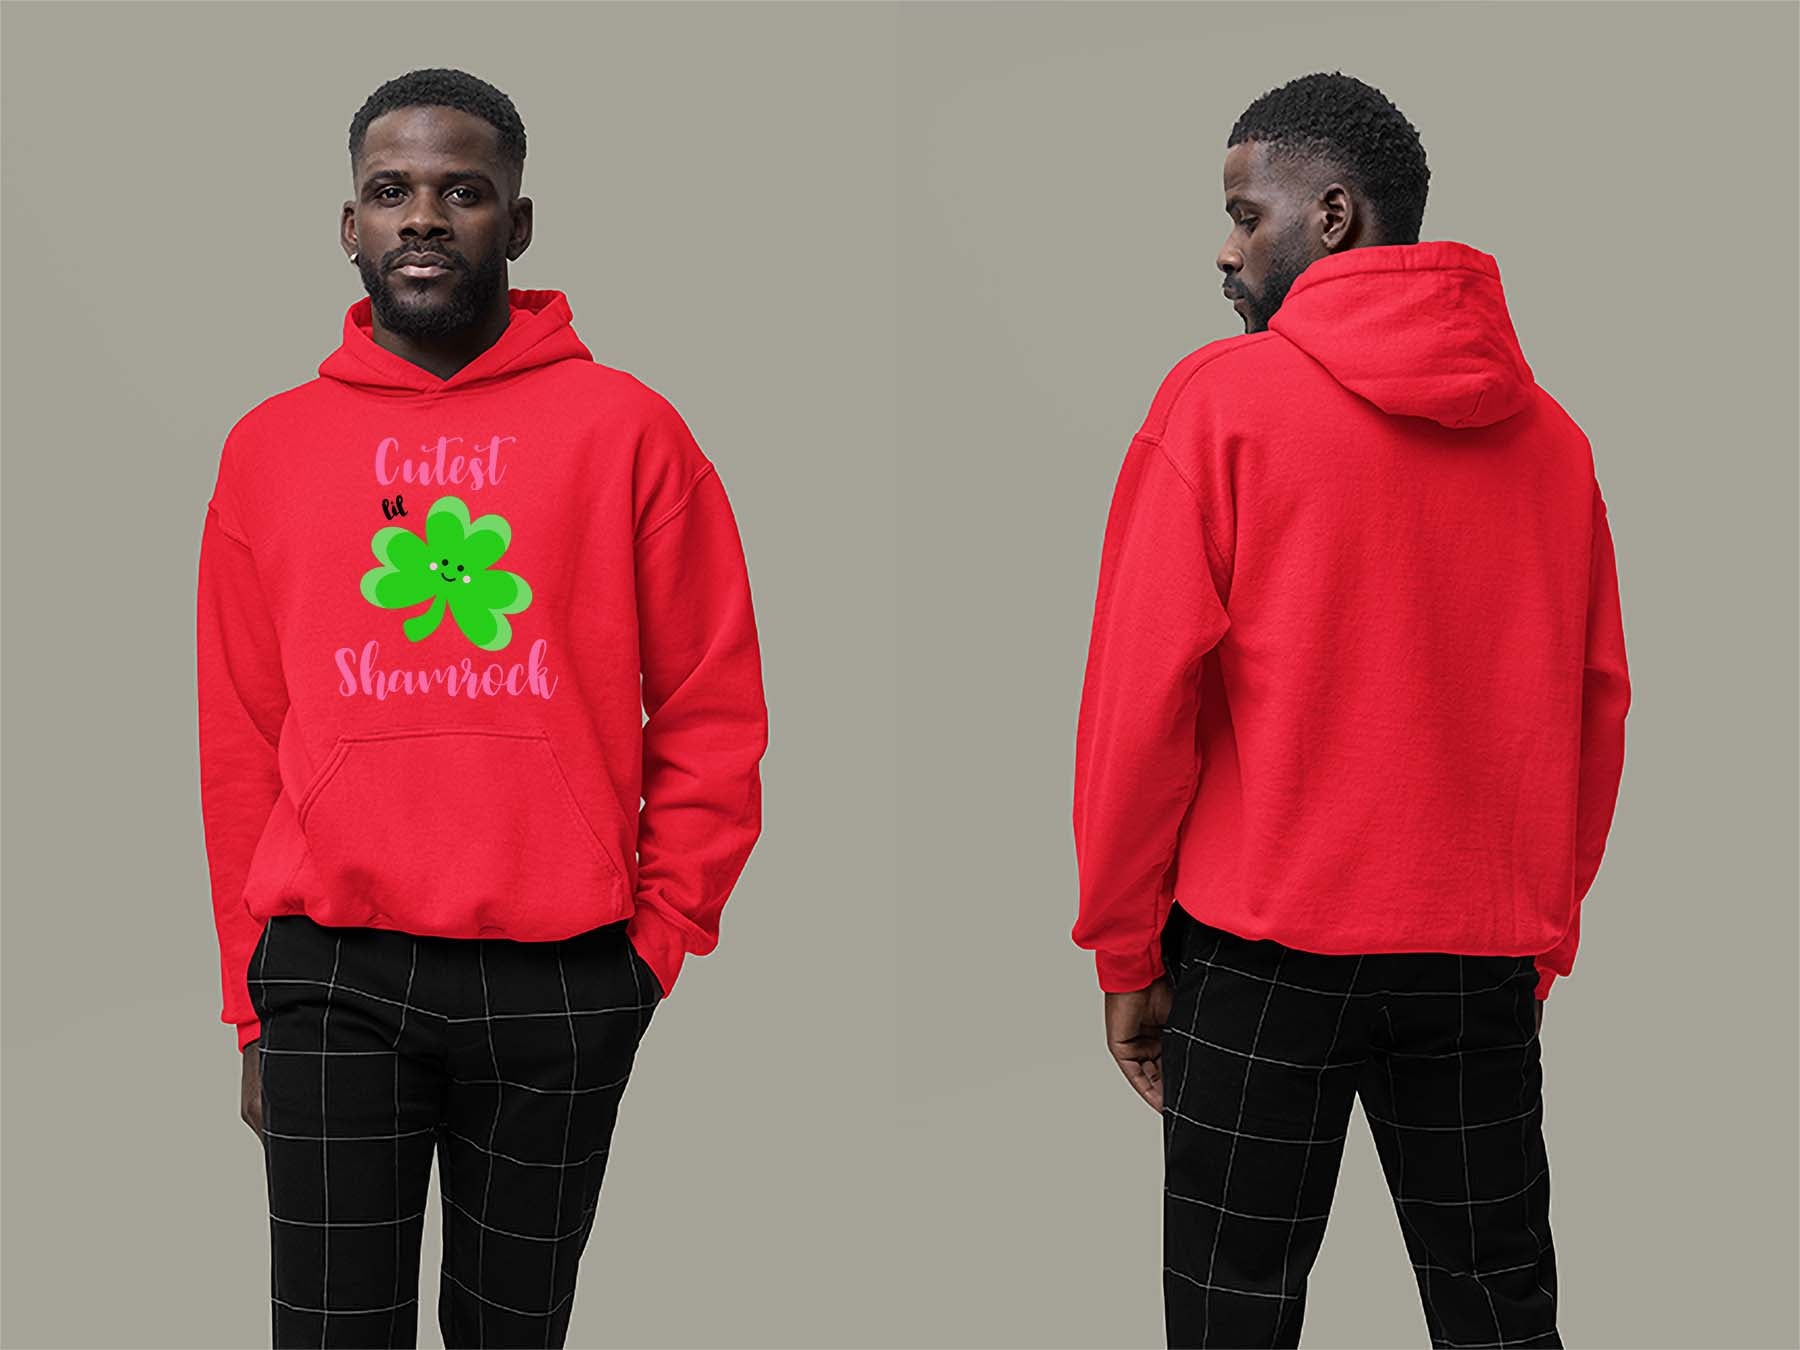 Fat Dave Cutest lil Shamrock Hoodie Small Red